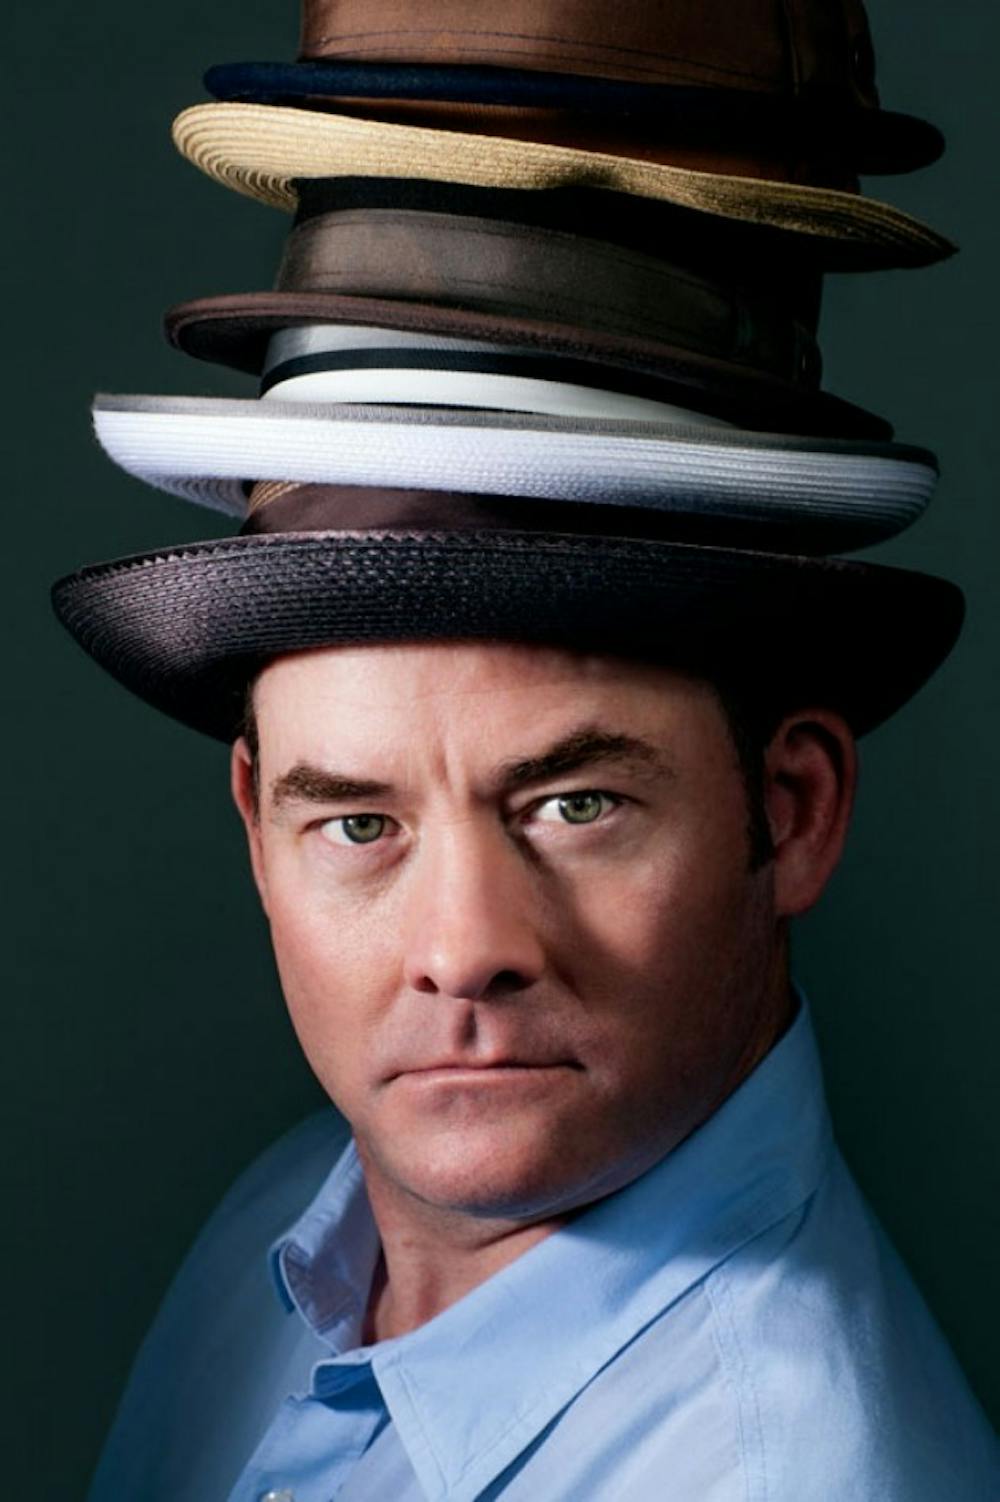 &nbsp;Actor and comedian, David Koechner might
be best known for his role in Anchorman,
but his roots lie in stand-up and improv comedy.